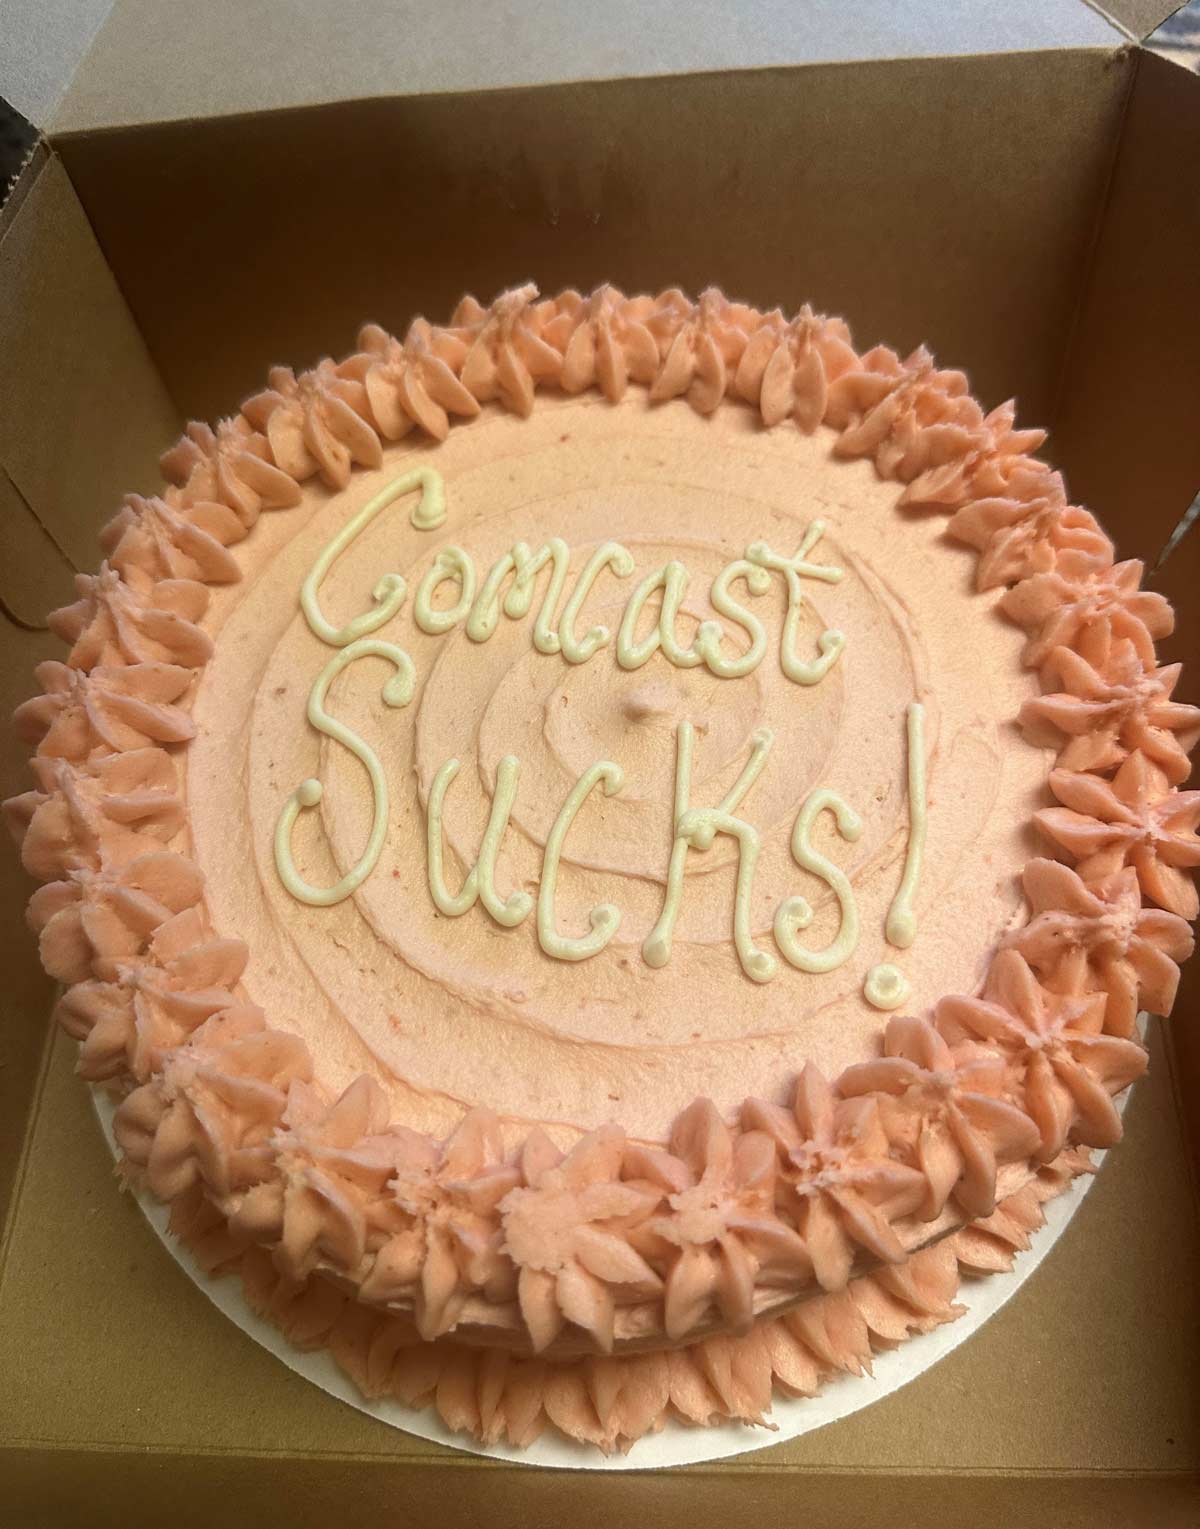 My Birthday Cake Today. After a certain ISP's stupidity ruined my Birthday plans, my family thought it would be funny to get me this cake